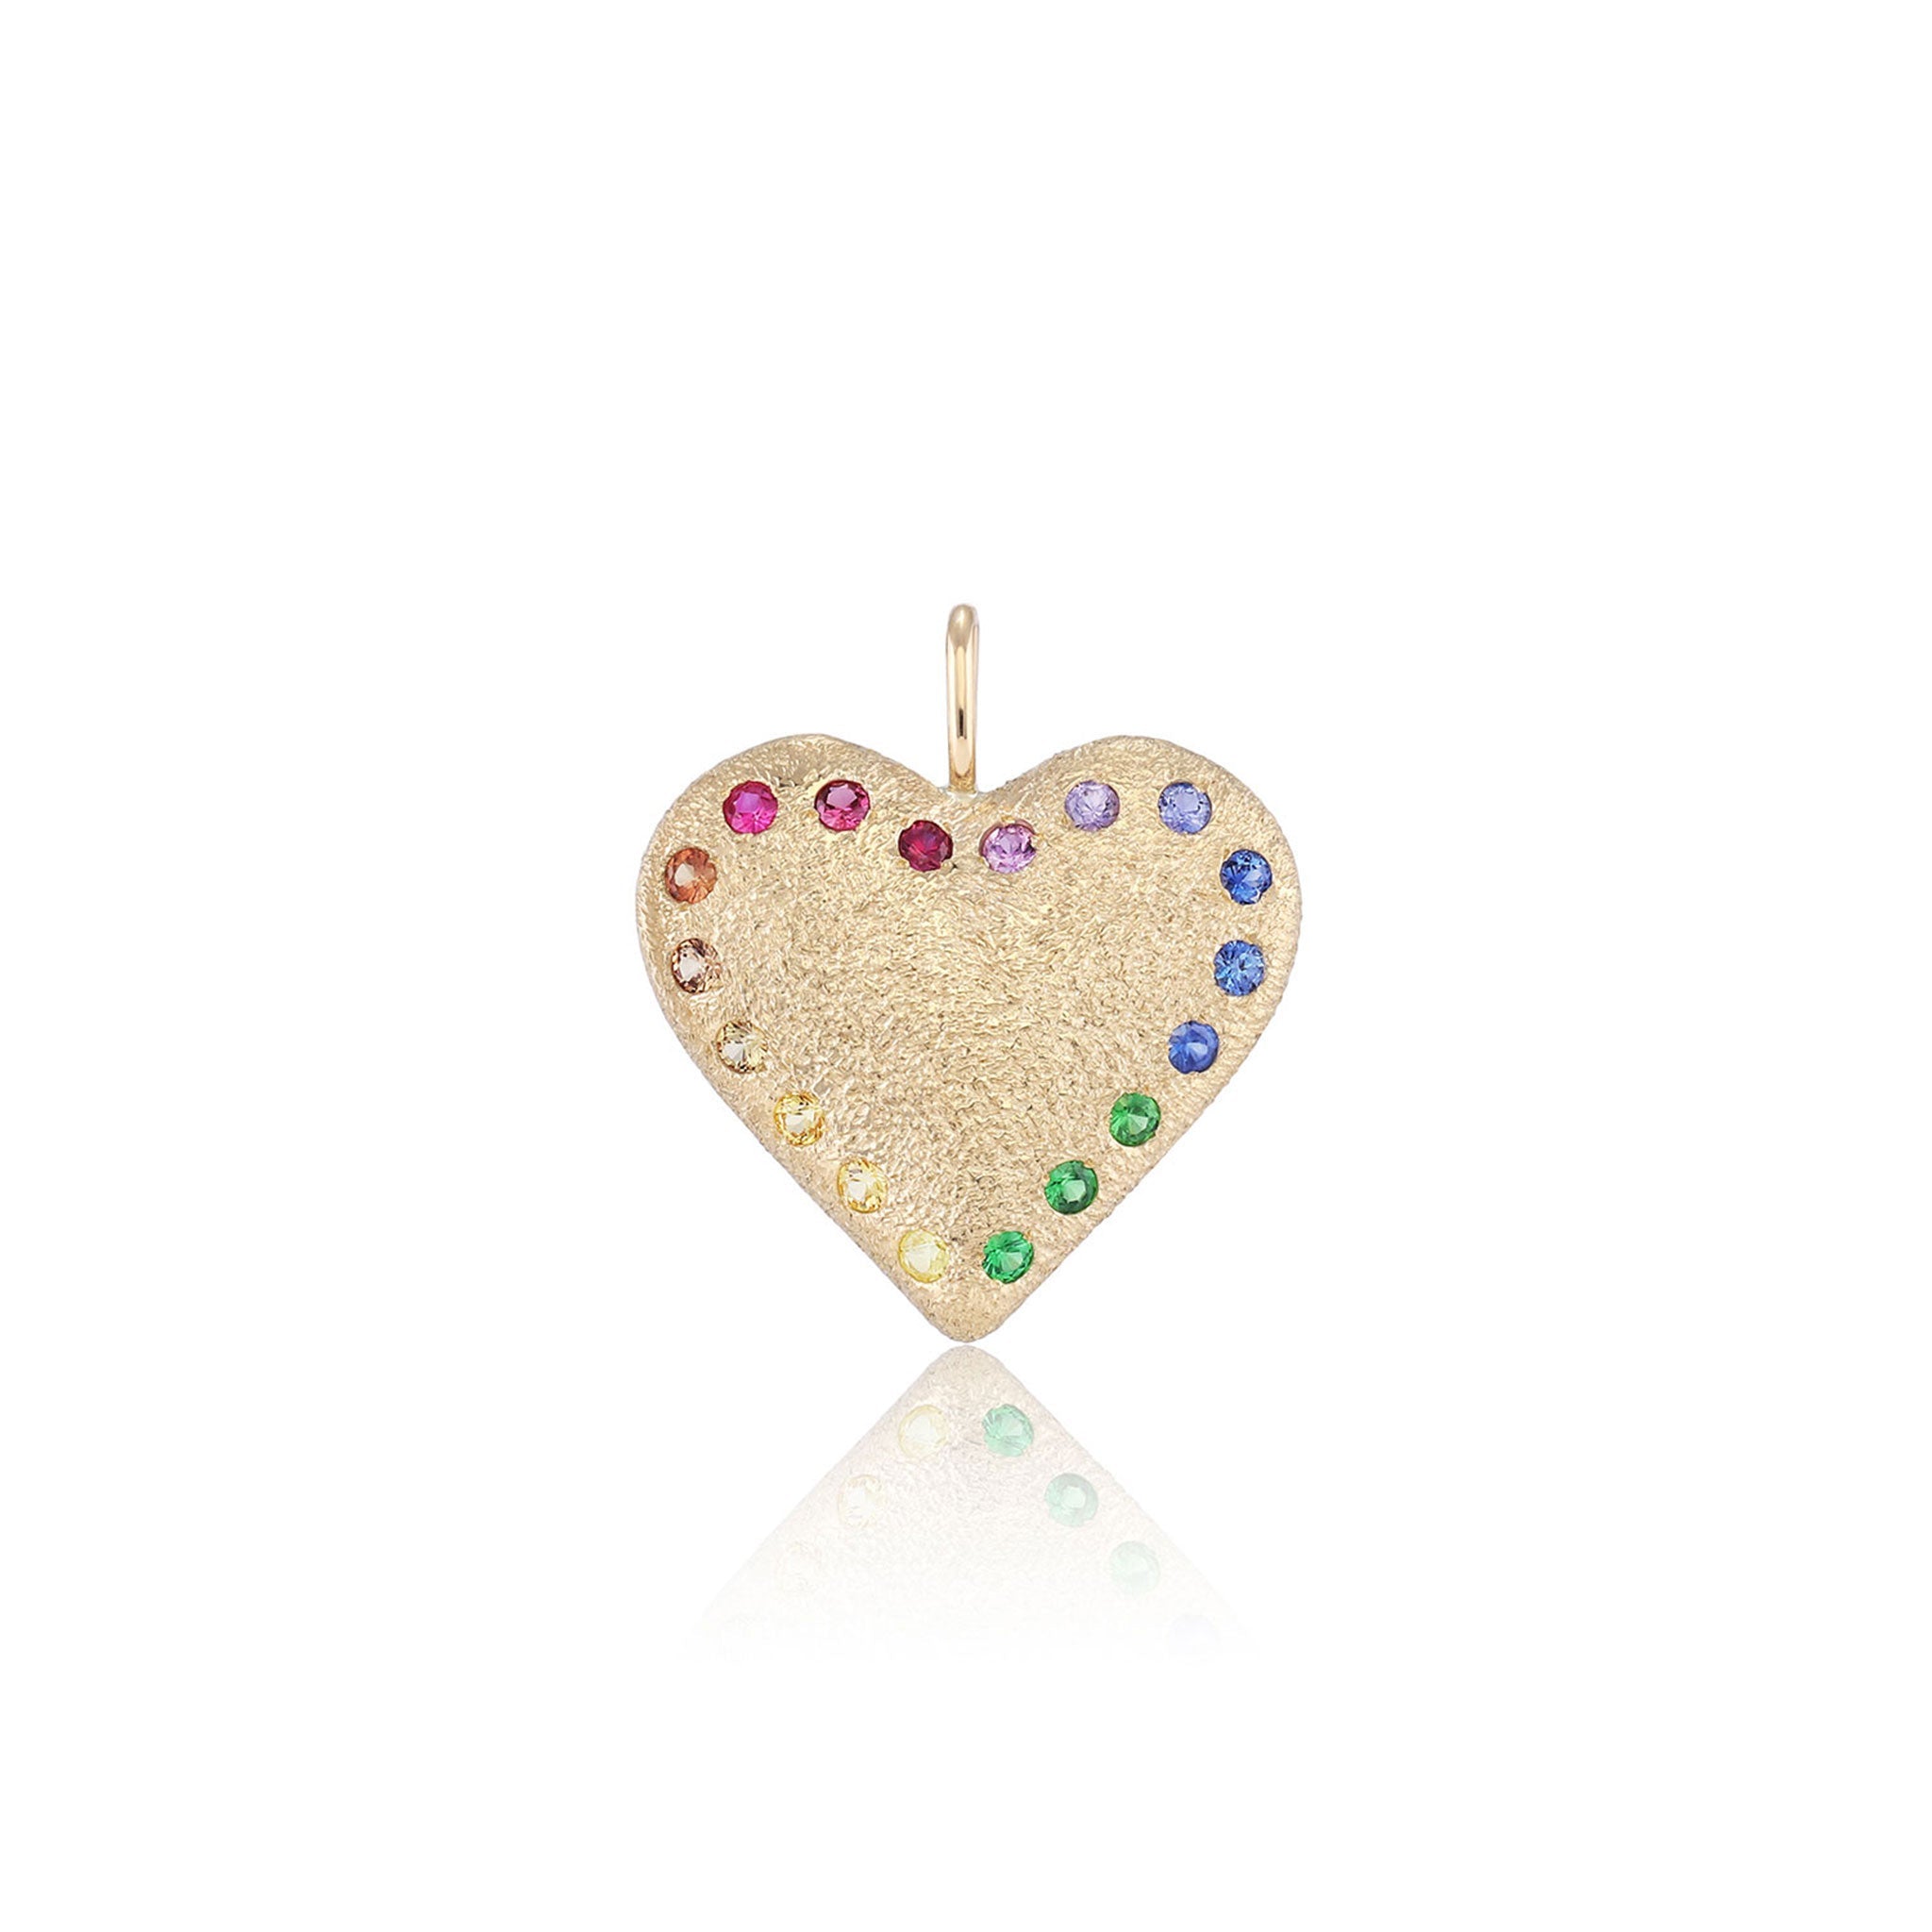 Imperfect Grace Rainbow Puffy Heart Charm - Be On Park